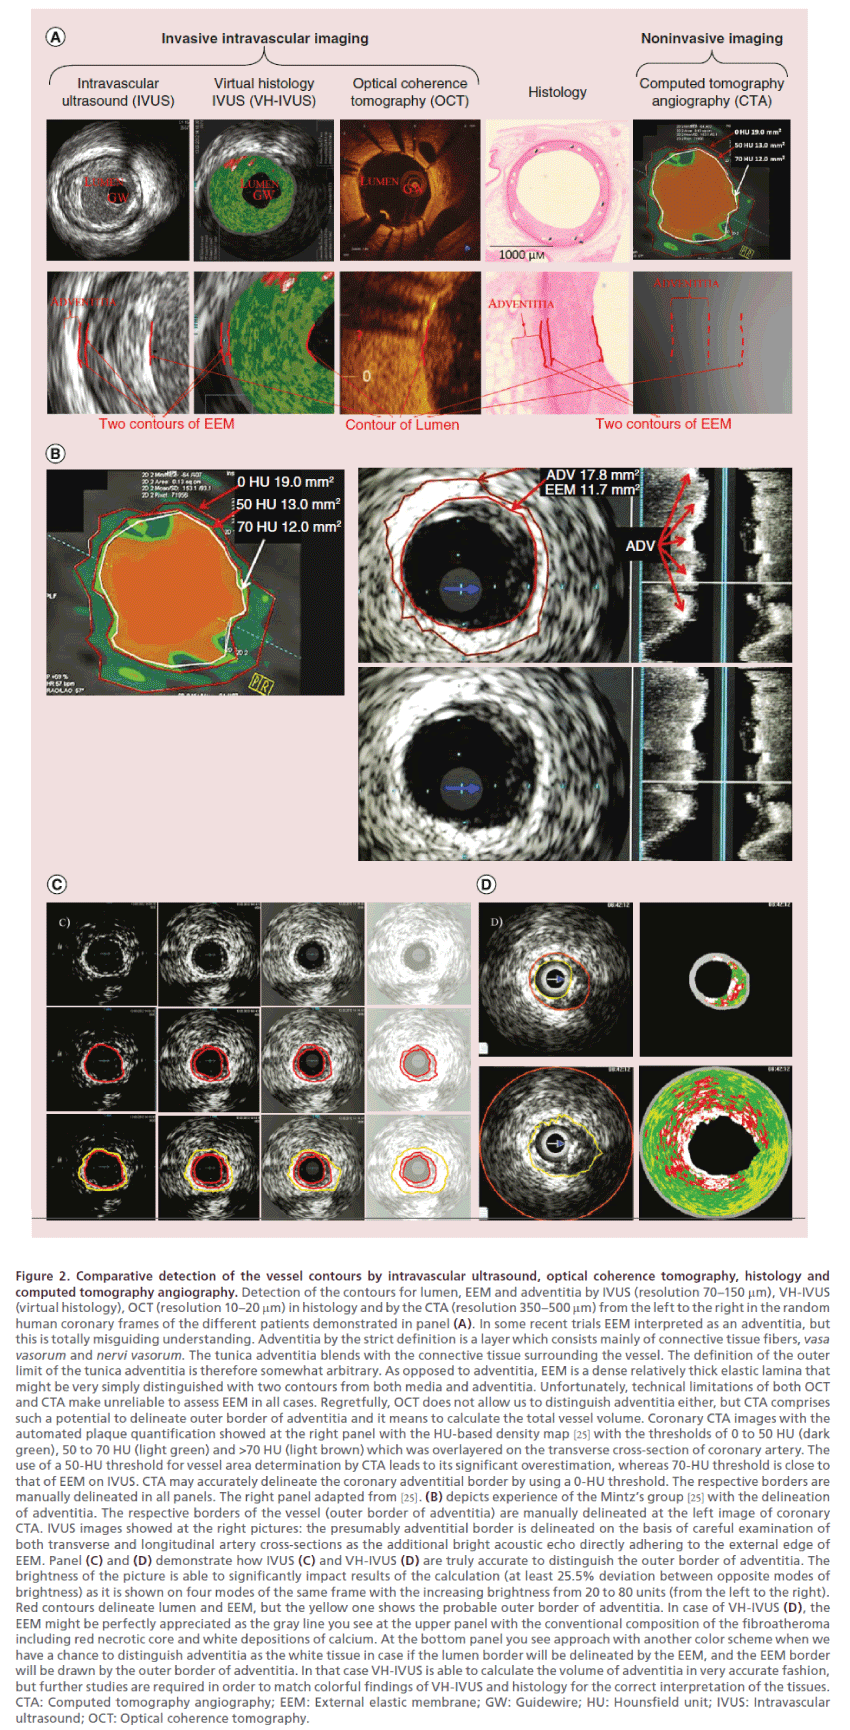 interventional-cardiology-tomography-angiography